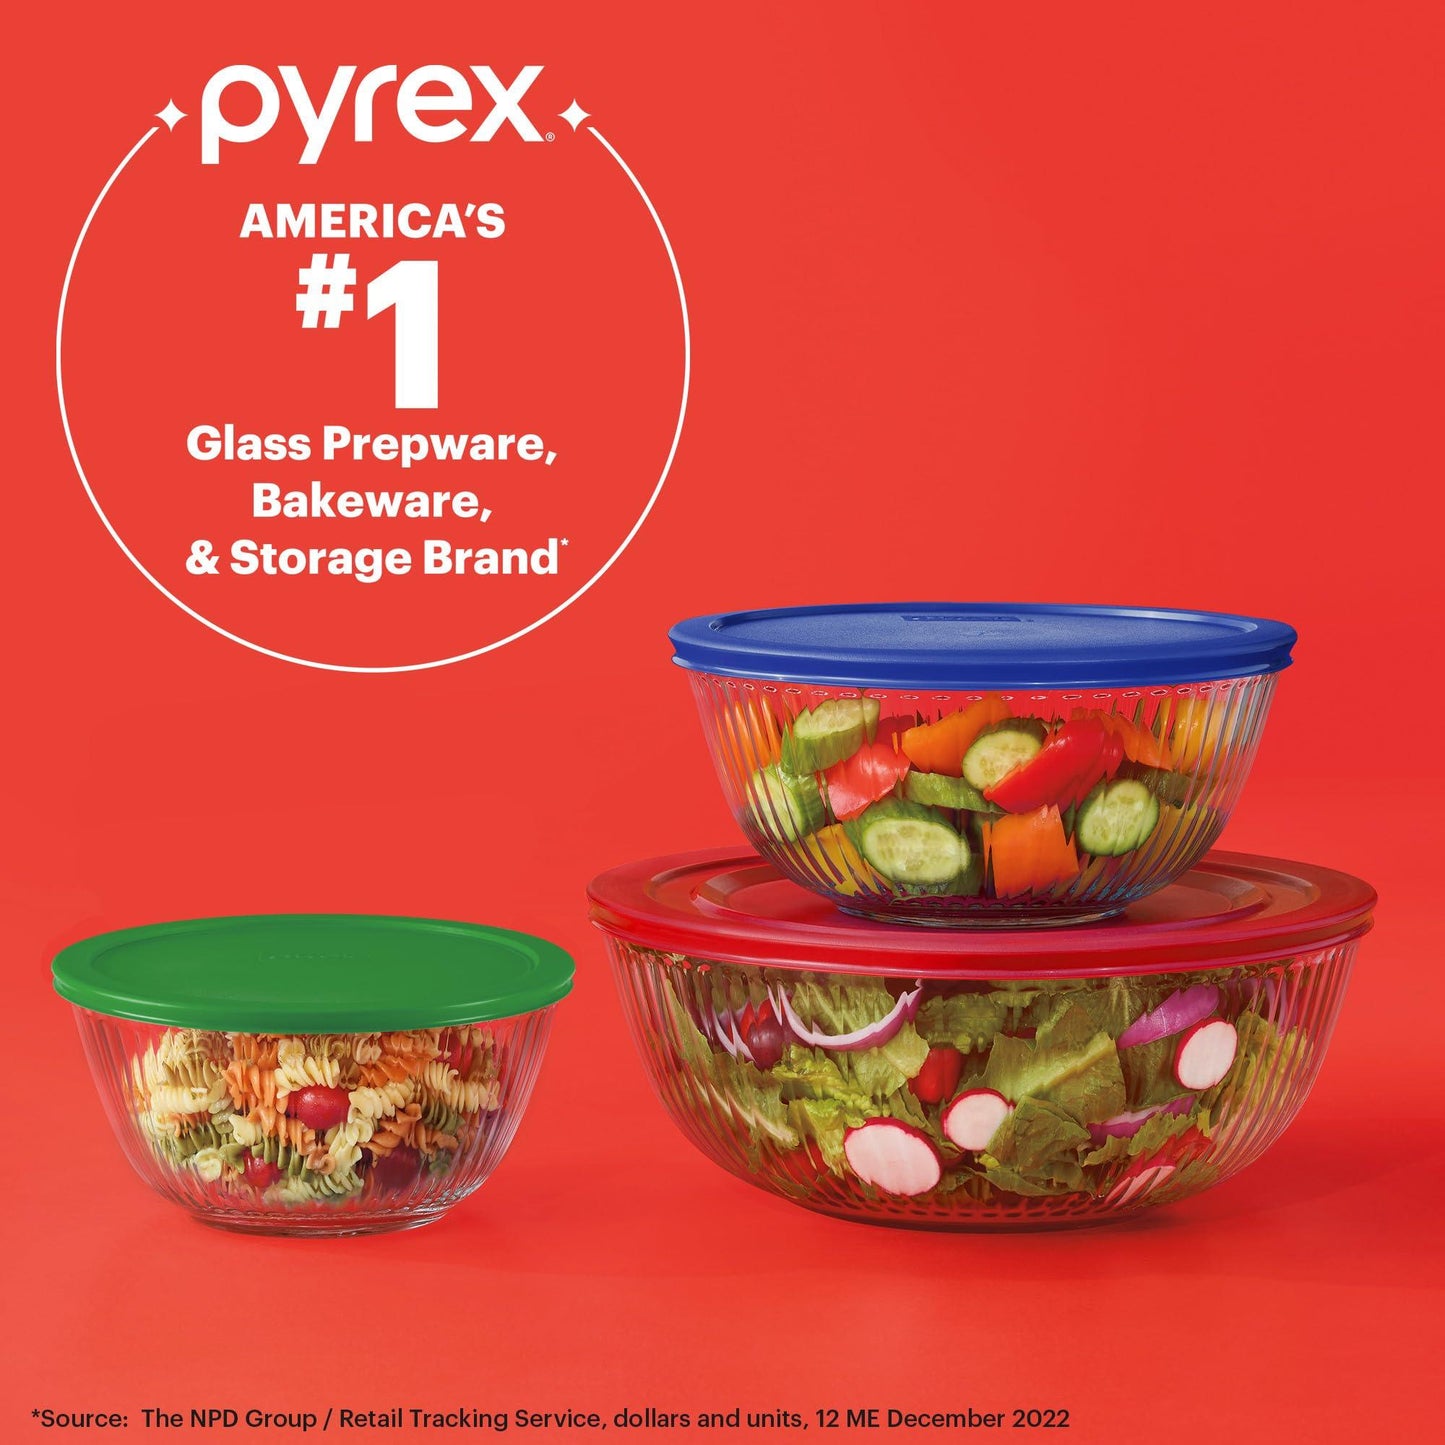 Pyrex Sculpted Large 6-Piece Glass Mixing Bowls, 1.3 QT, 2.3 QT, and 4.5 QT Prepping and Baking Food Storage Set, Dishwasher, Microwave and Freezer Safe - CookCave